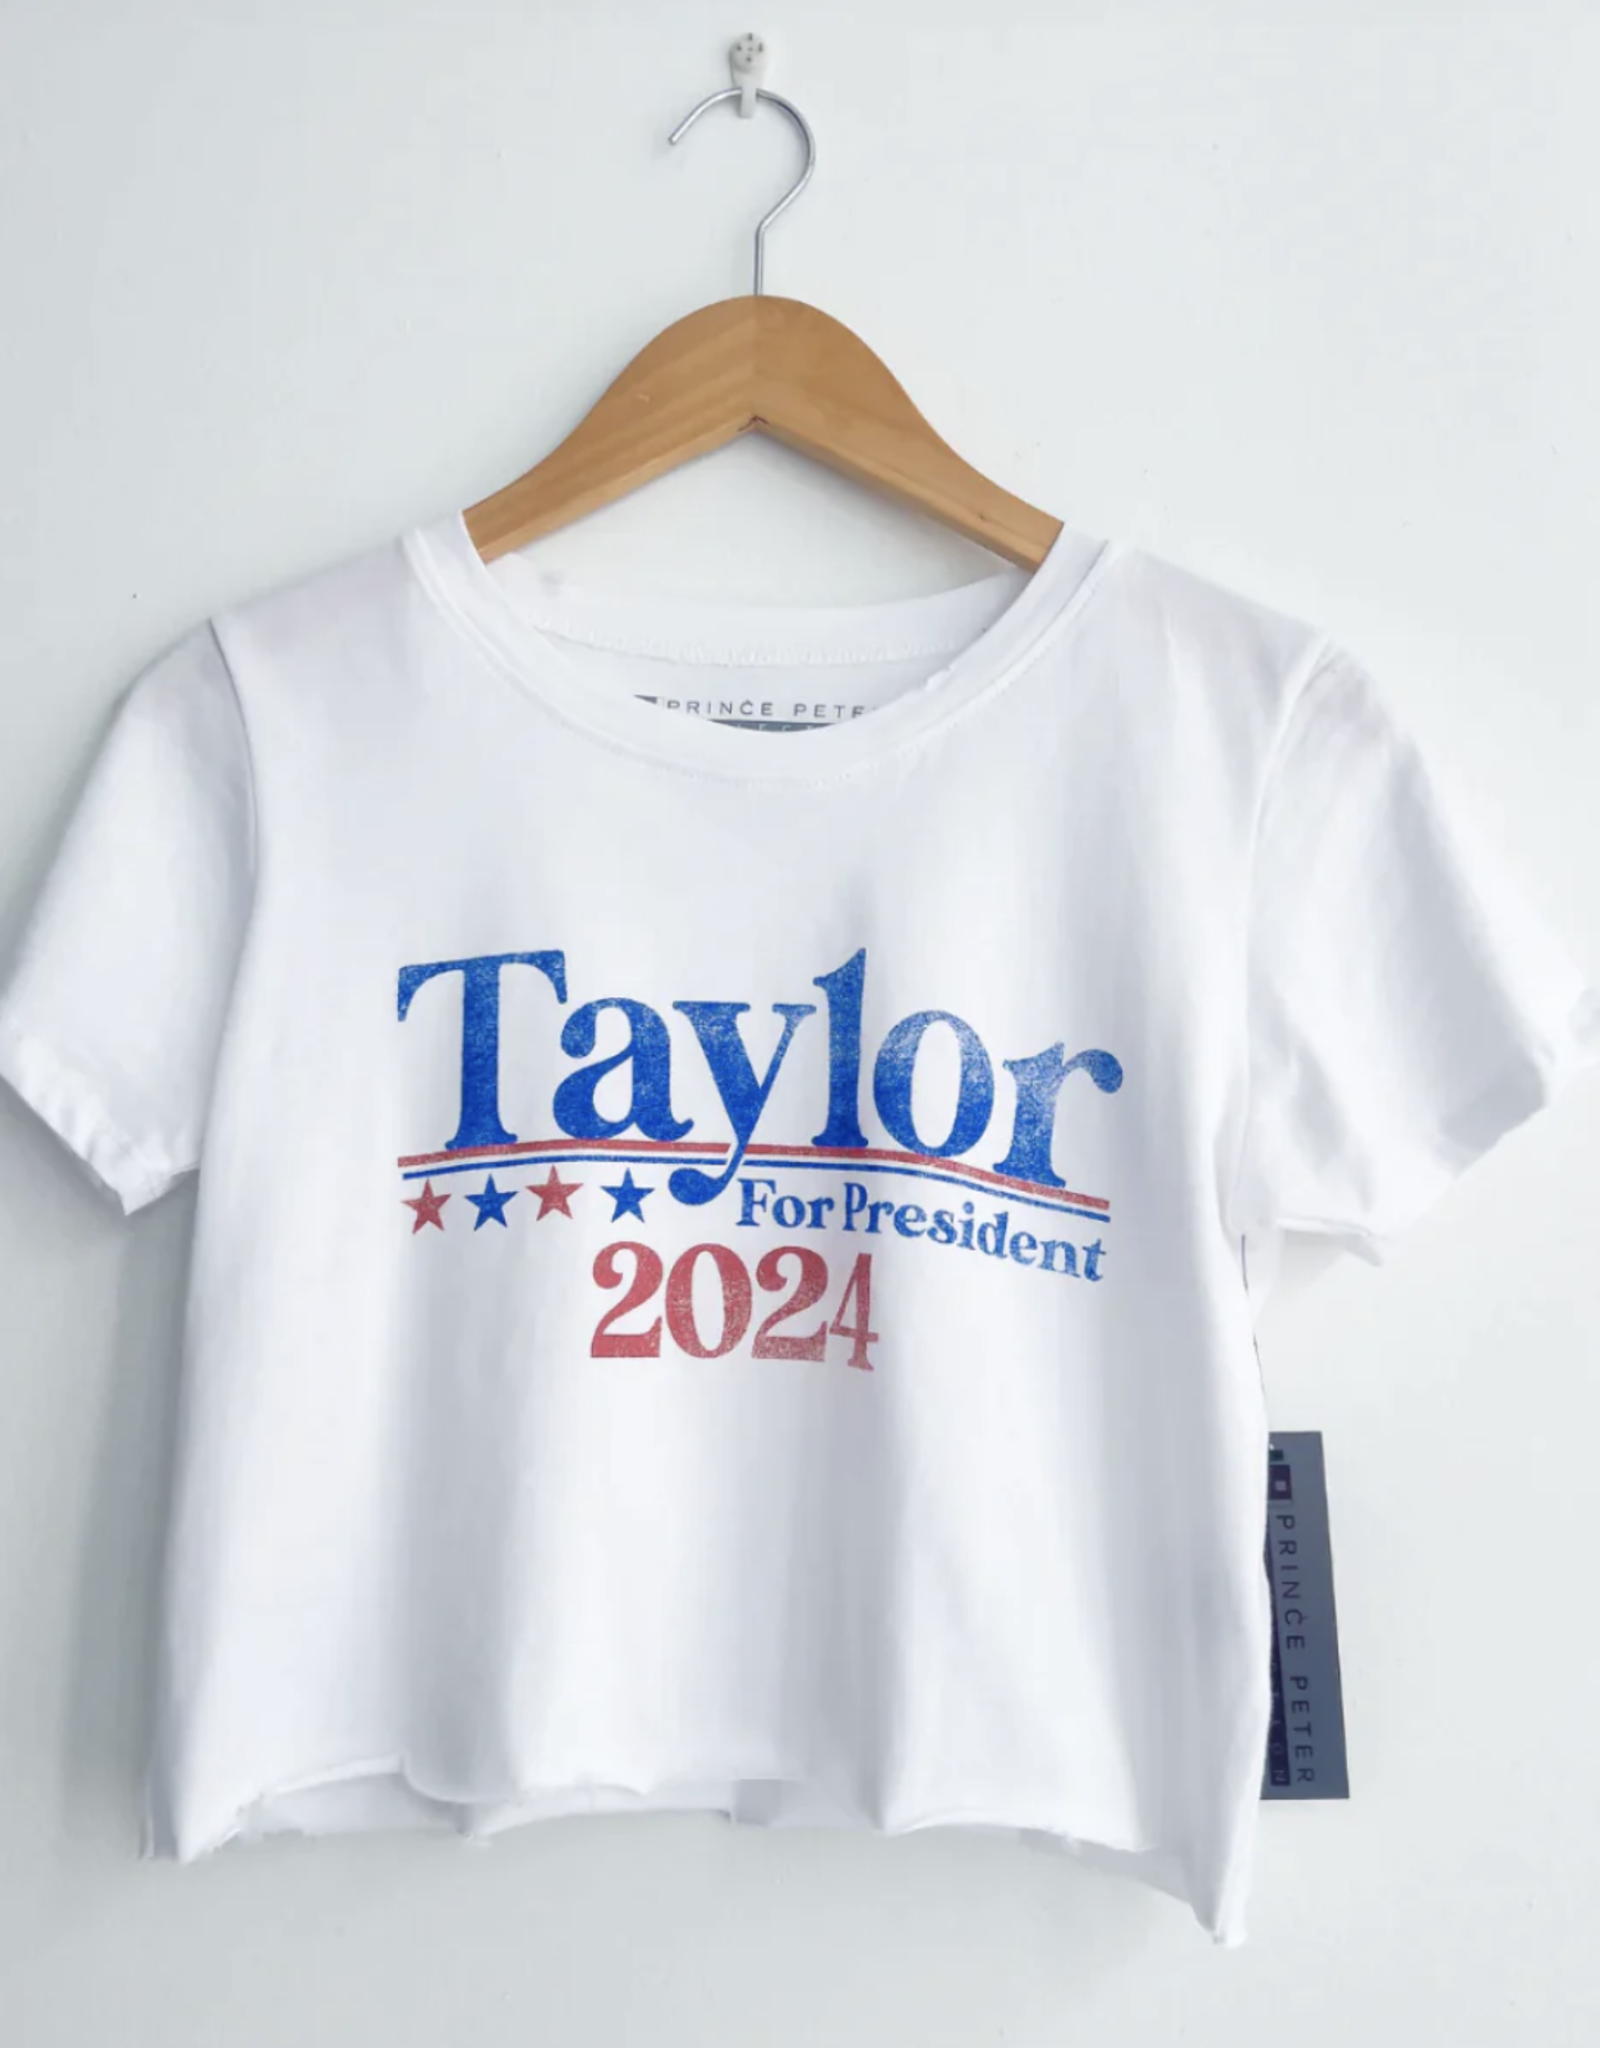 Prince Peter taylor for president tee